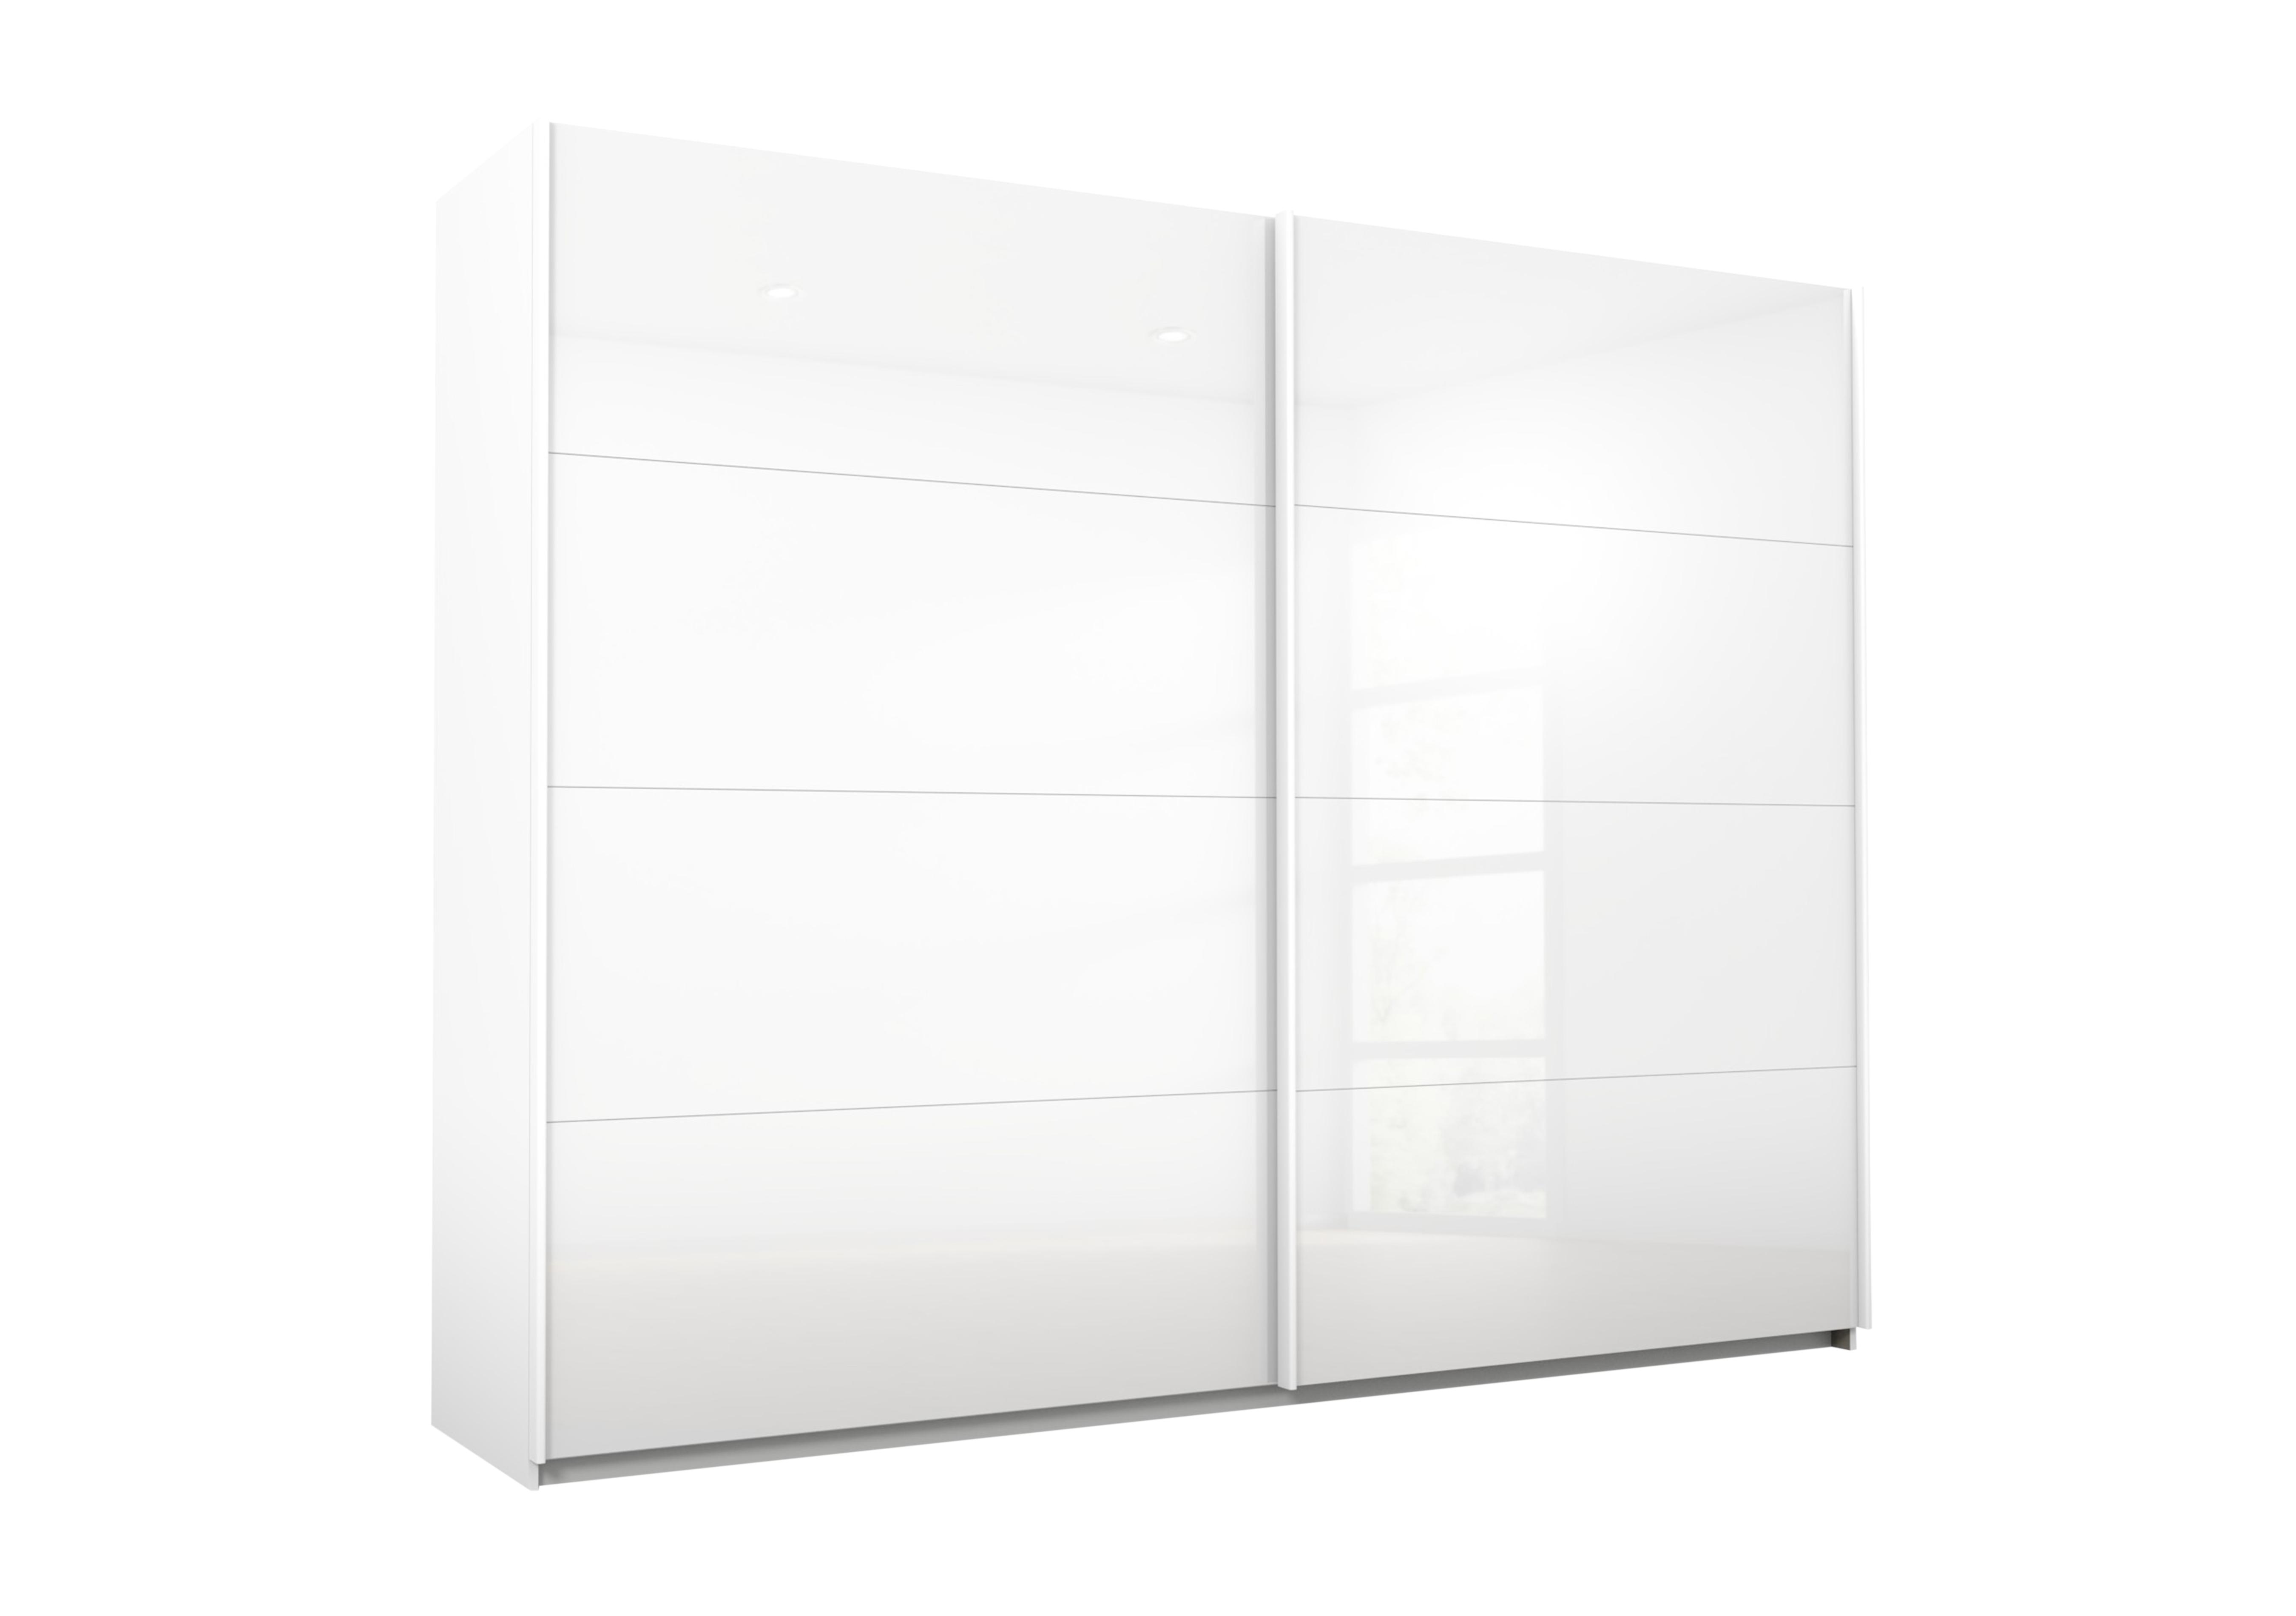 Lima 271cm 2 Door Sliding Wardrobe with Glass Front 210cm Tall in Ag354alp Wht/Wht Gls on Furniture Village